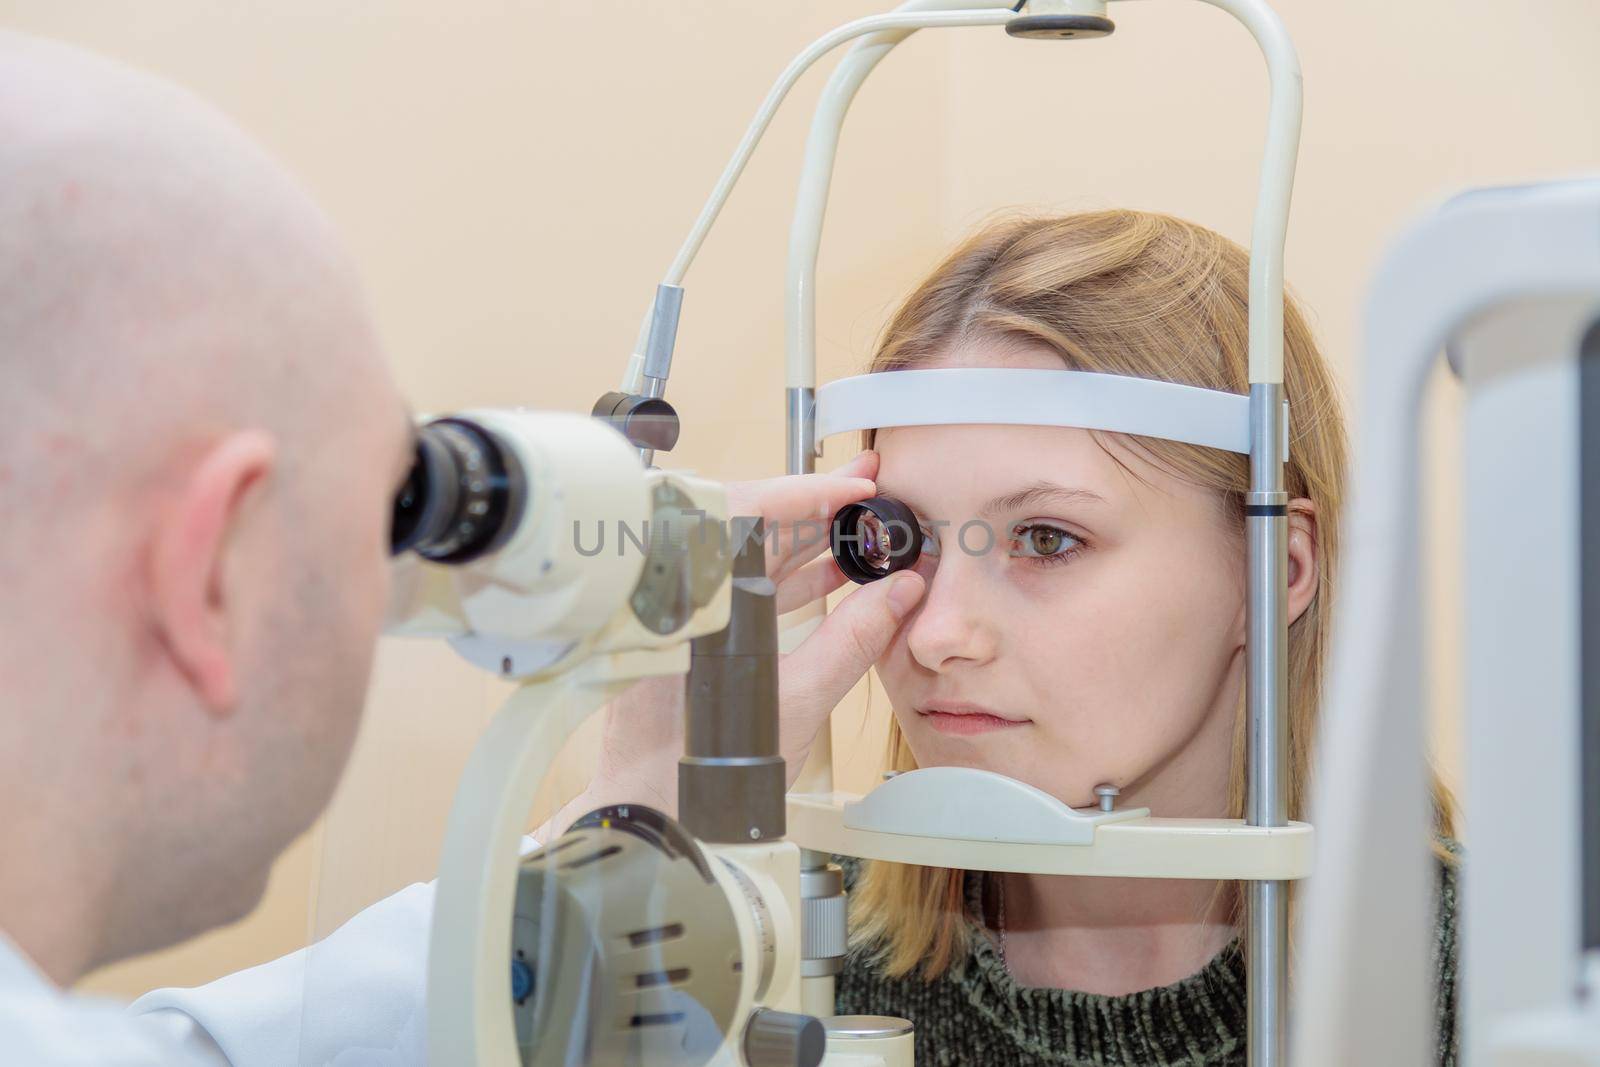 A male ophthalmologist checks the eyesight of a young girl using a modern device with a light beam.